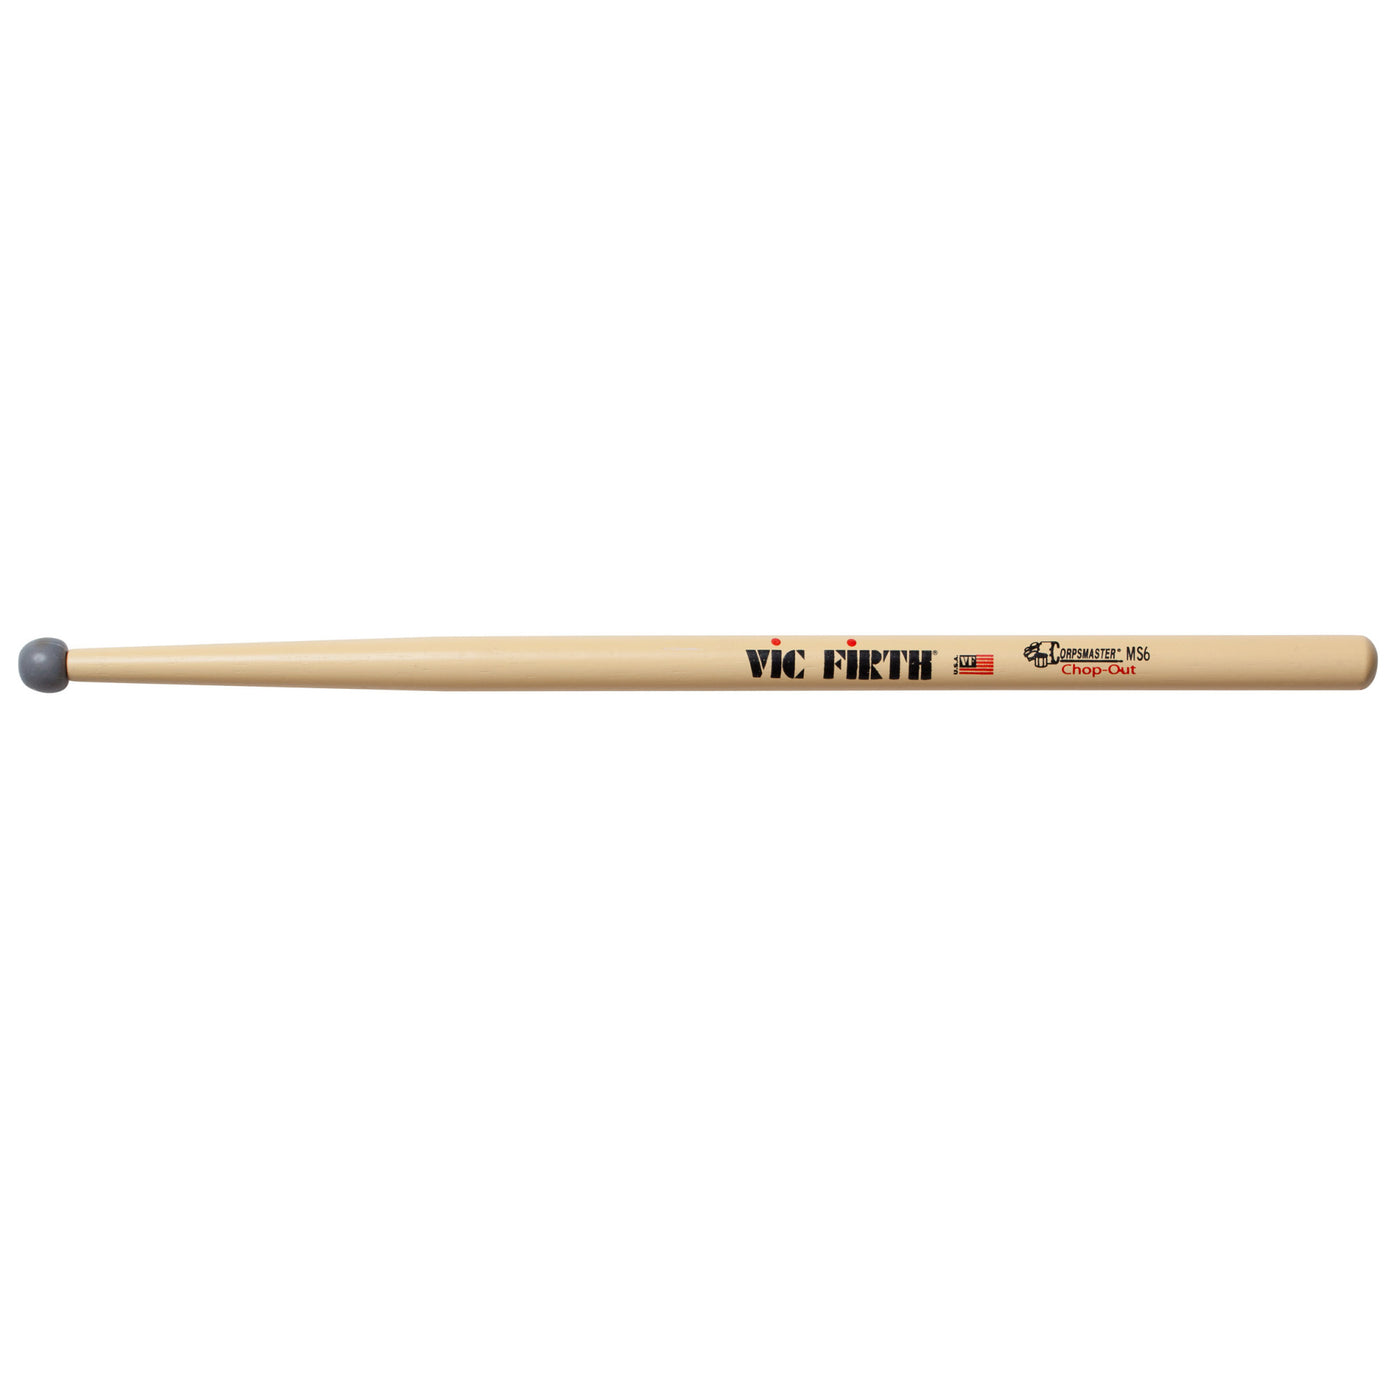 Vic Firth Corpsmaster Snare "Chop-Out" Practice Drumsticks